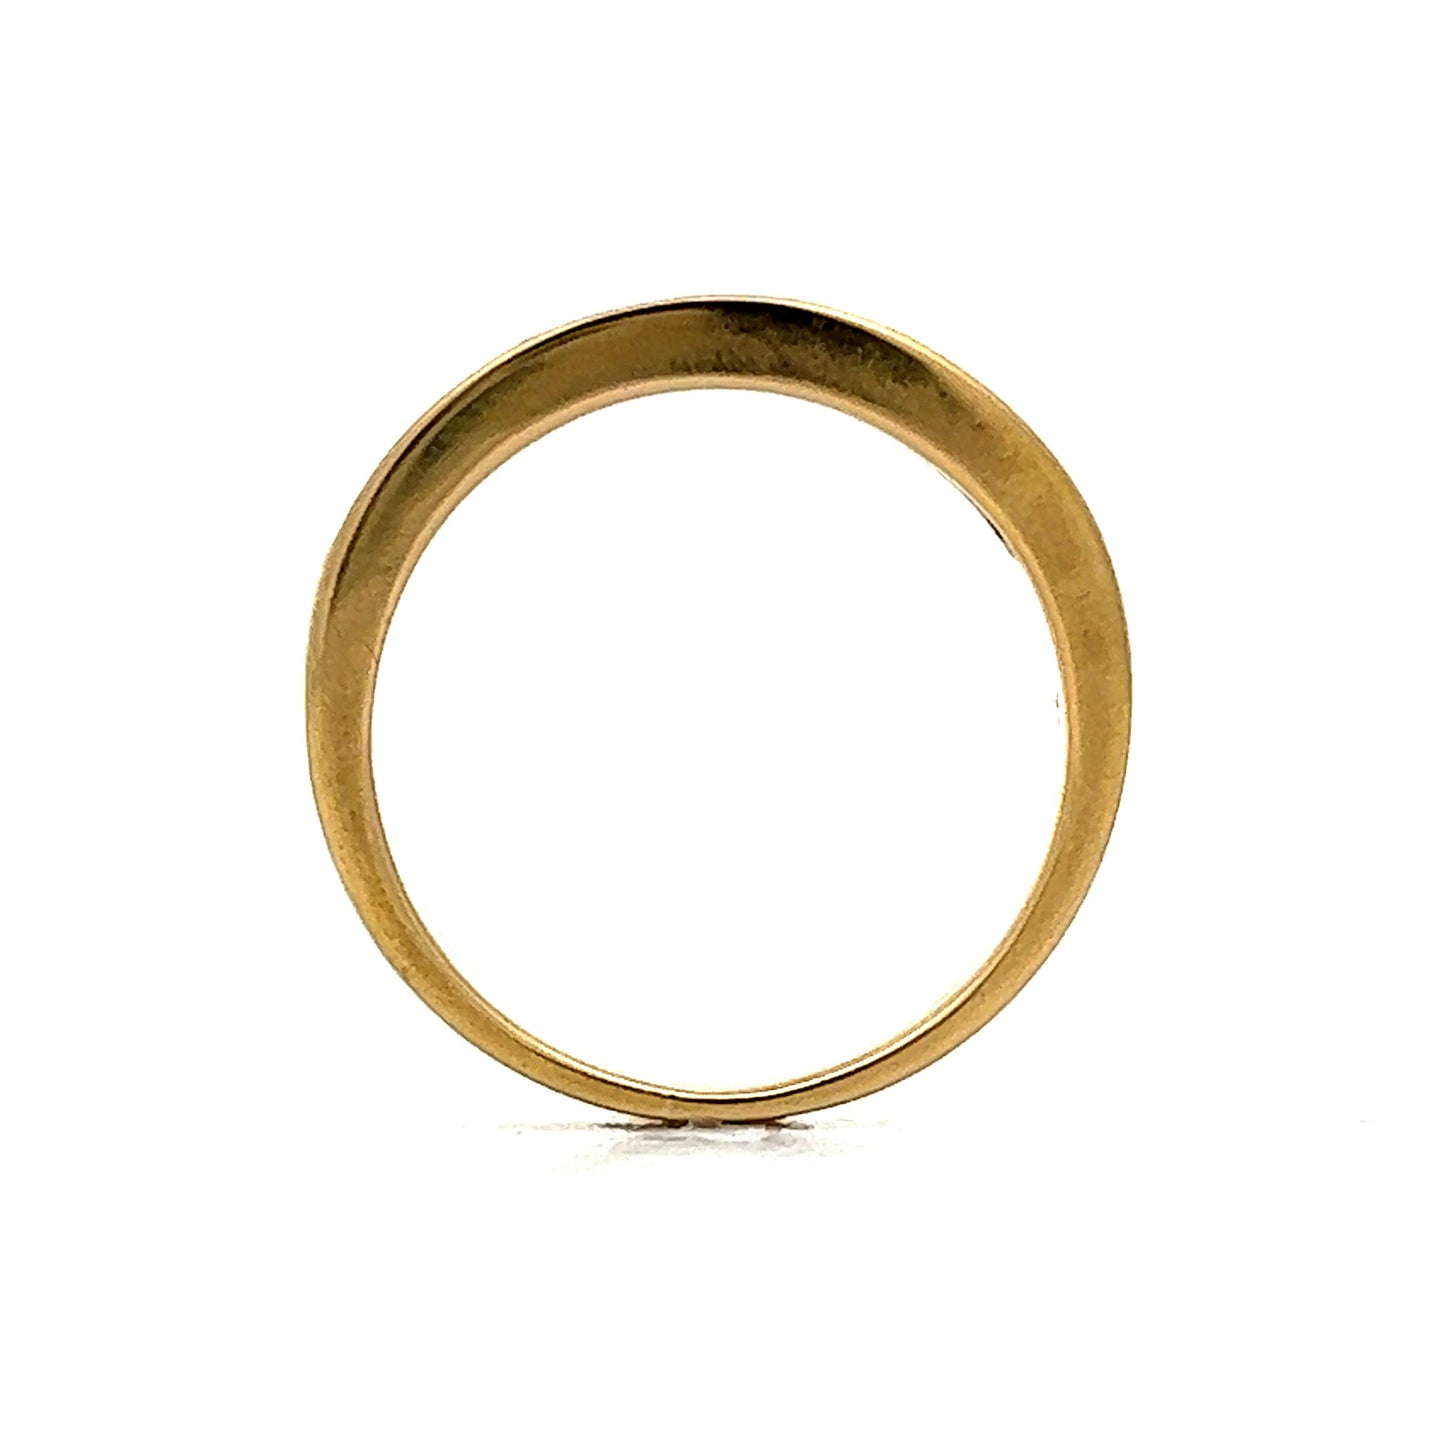 .53 Square Cut Emerald Wedding Band in 14k Yellow Gold